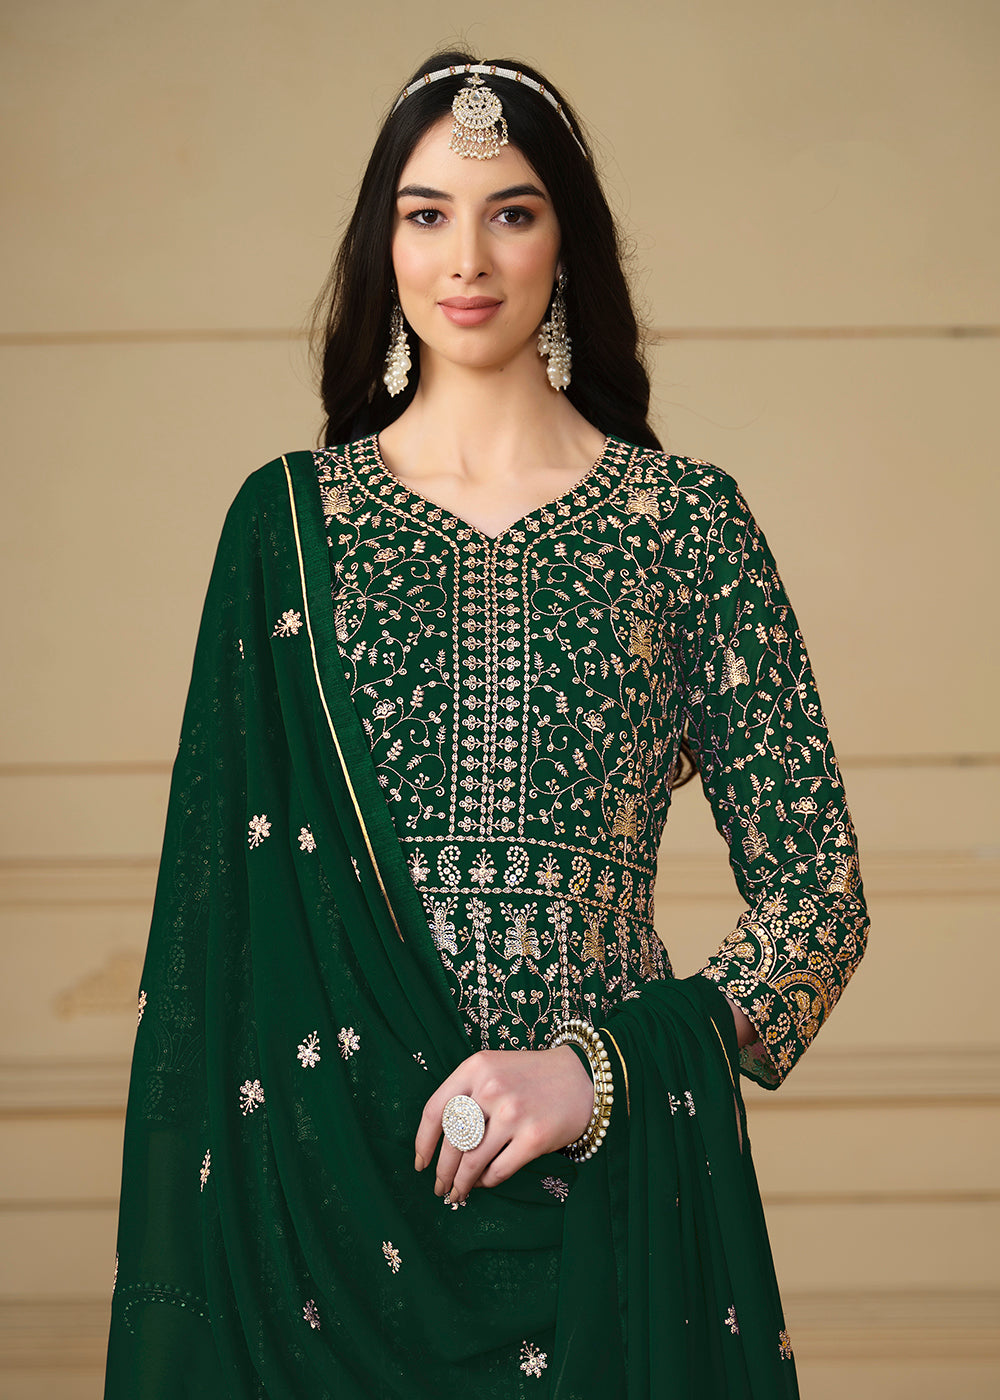 Buy Now Bottle Green Embroidered Trendy Style Anarkali Suit Online in USA, UK, Australia, New Zealand, Canada & Worldwide at Empress Clothing.